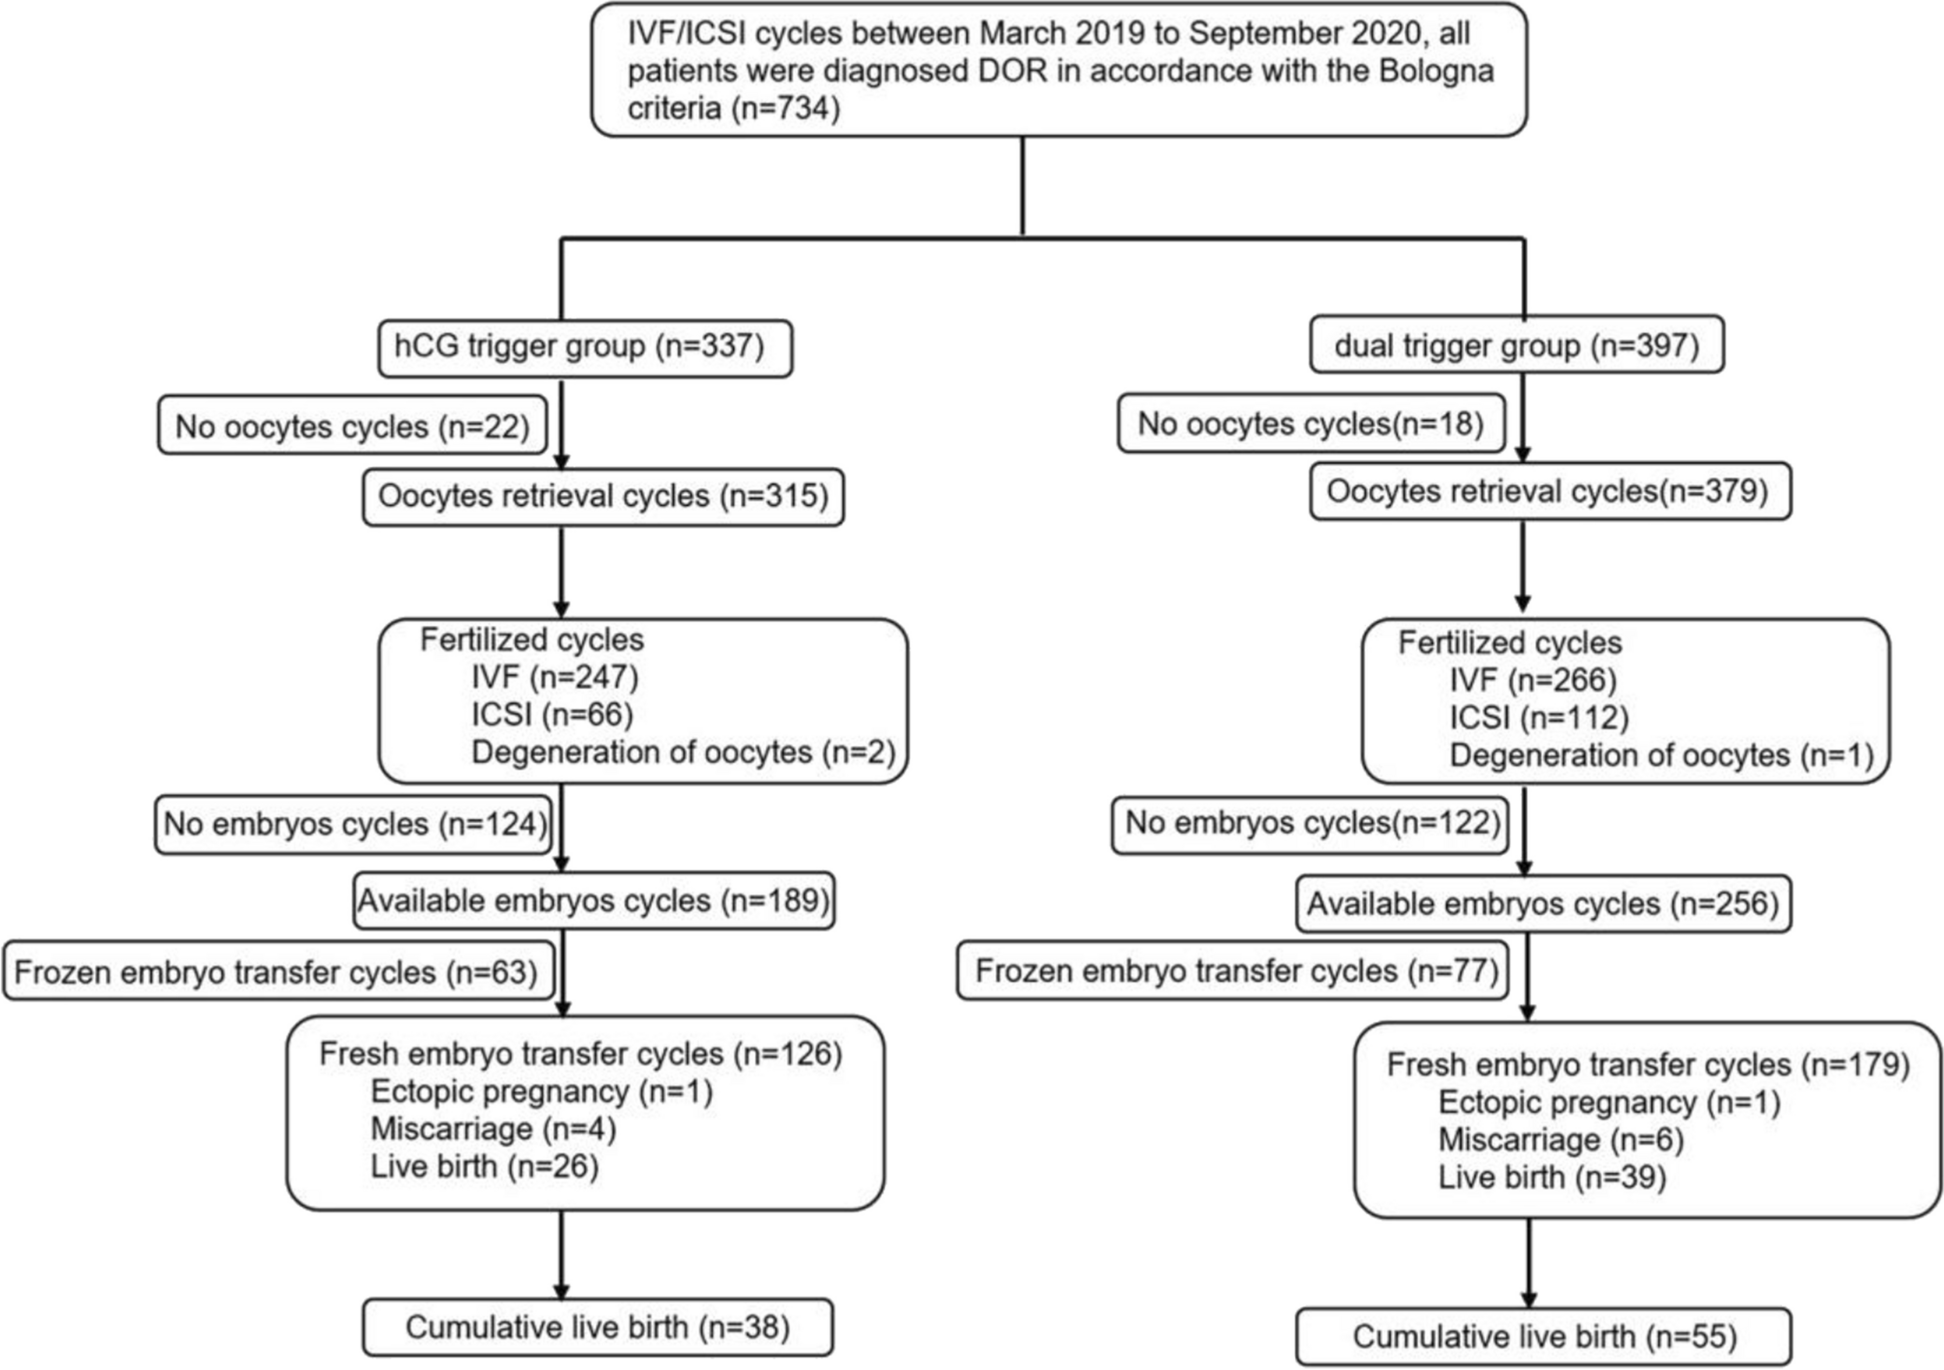 Reproductive outcomes of dual trigger therapy with GnRH agonist and hCG versus hCG trigger in women with diminished ovarian reserve: a retrospective study